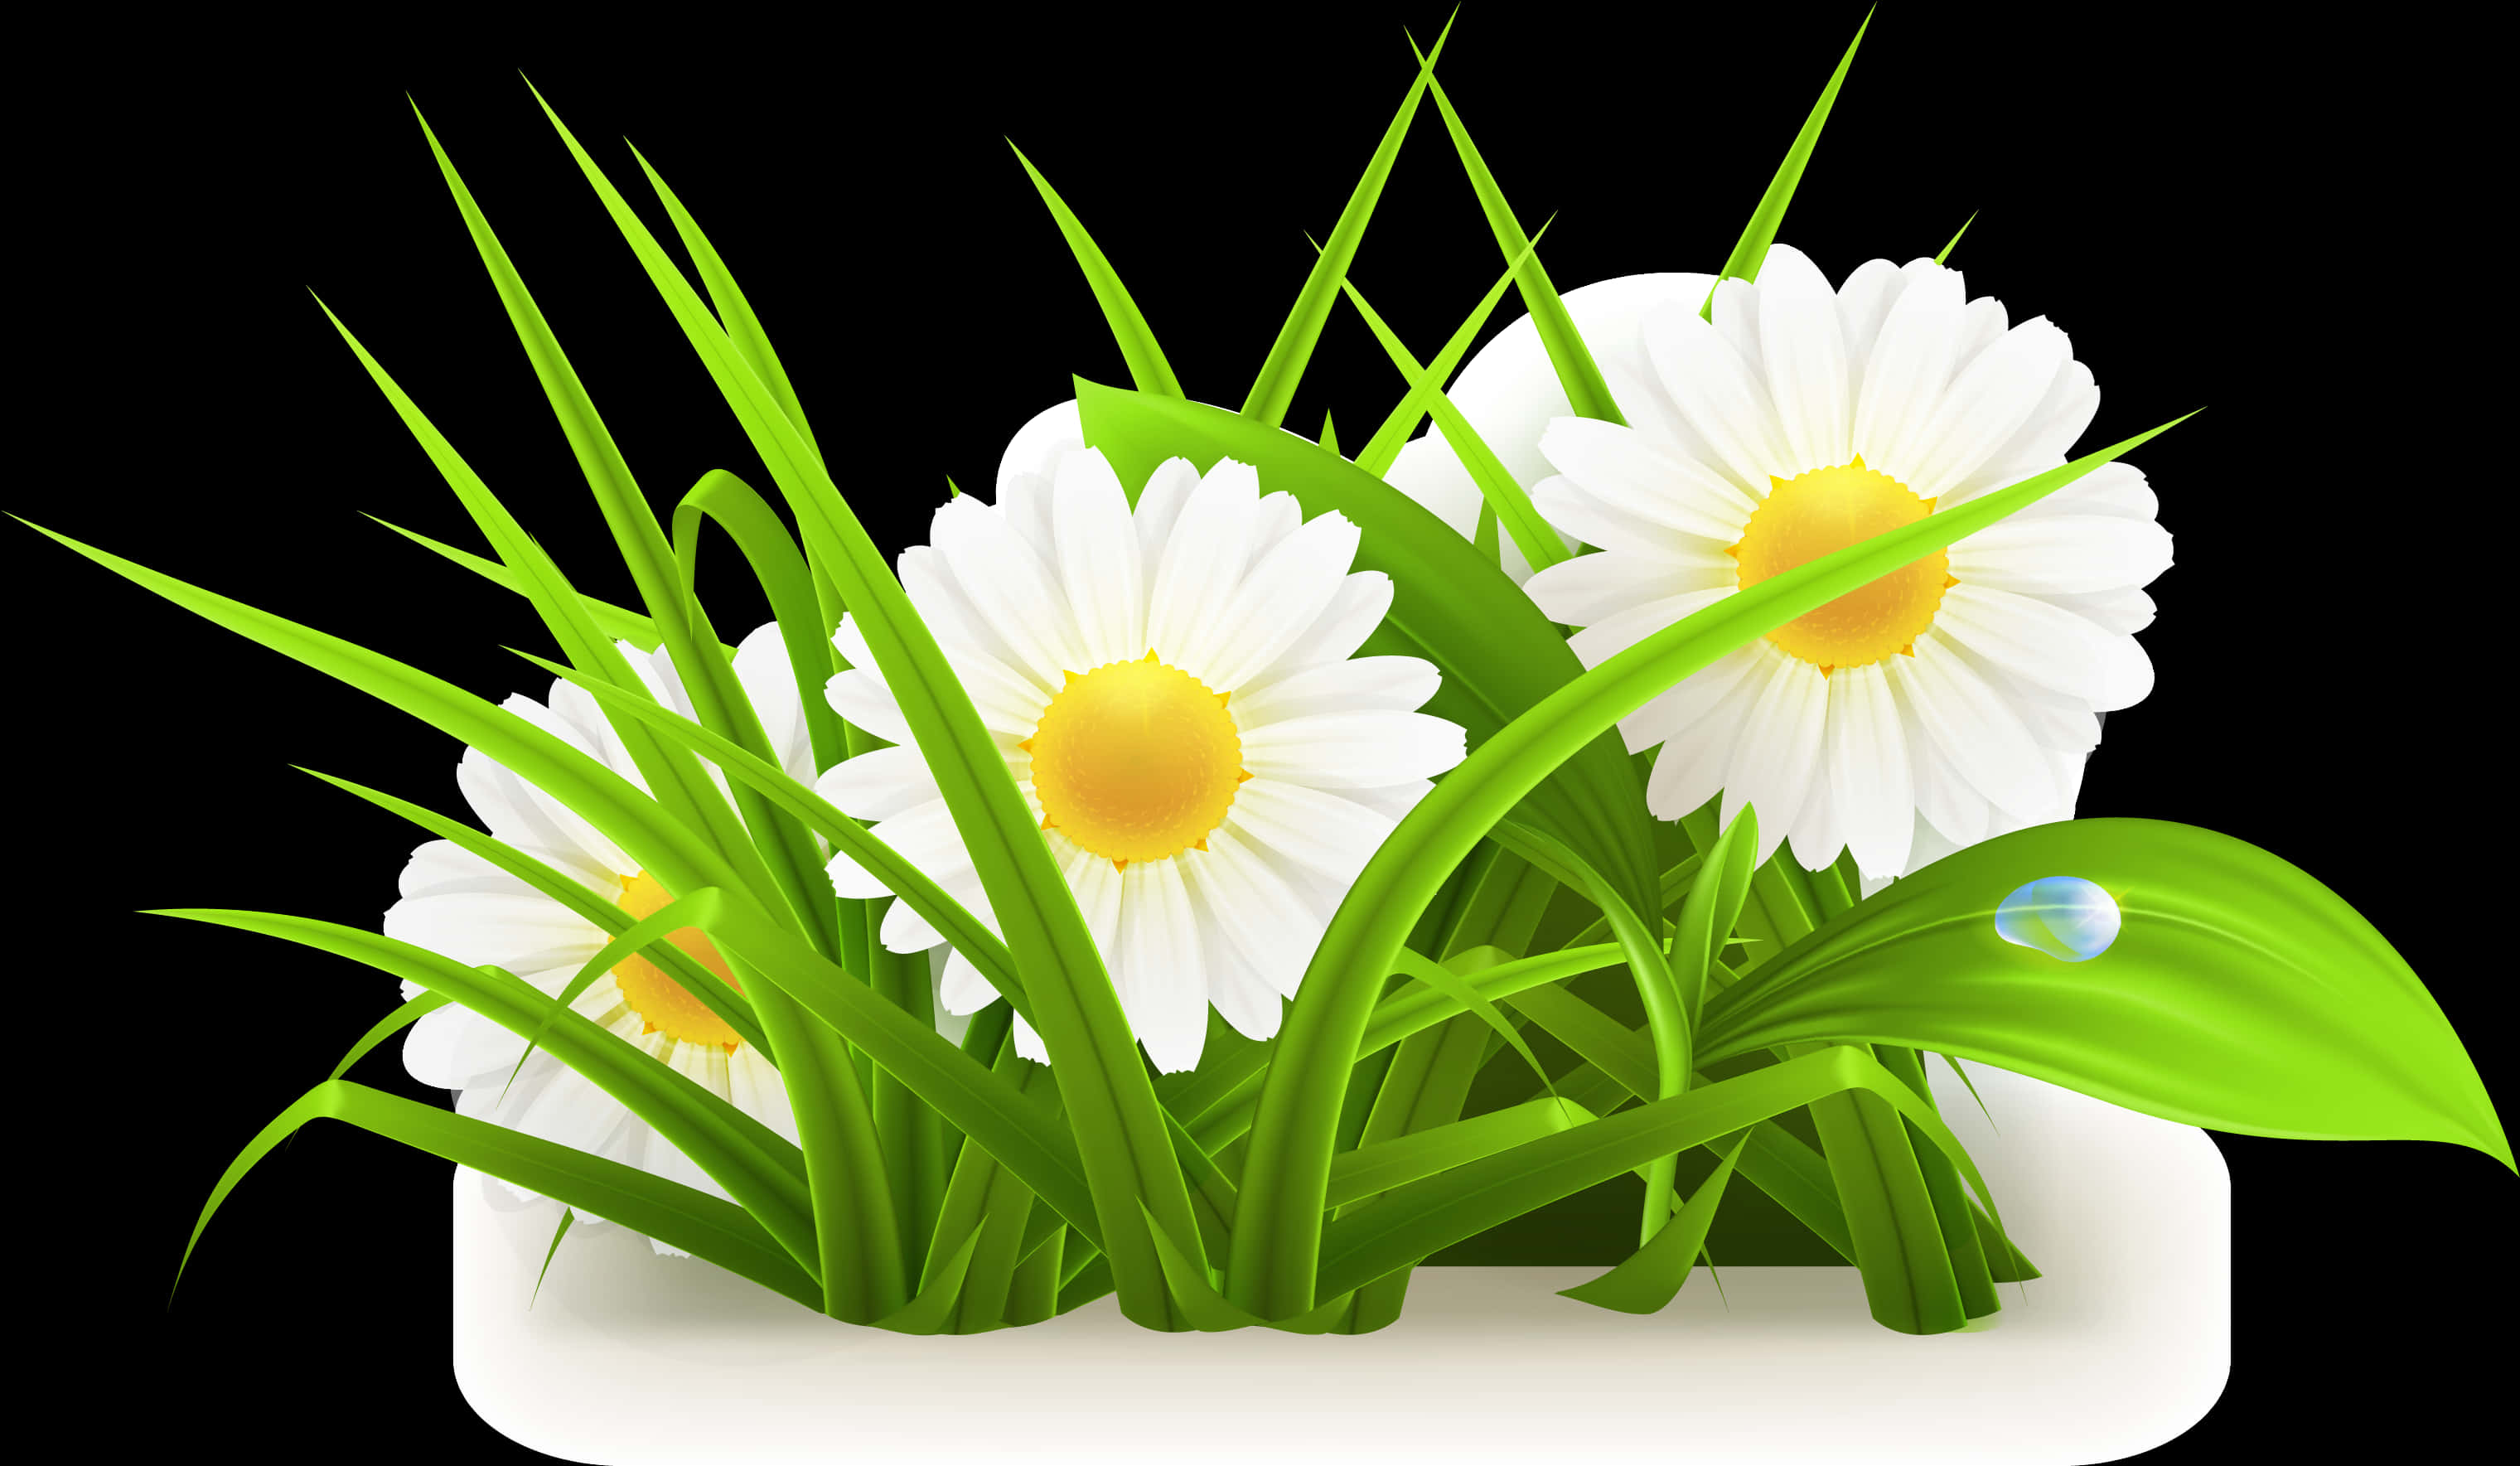 Download A Group Of White Flowers And Green Grass [100% Free] - FastPNG